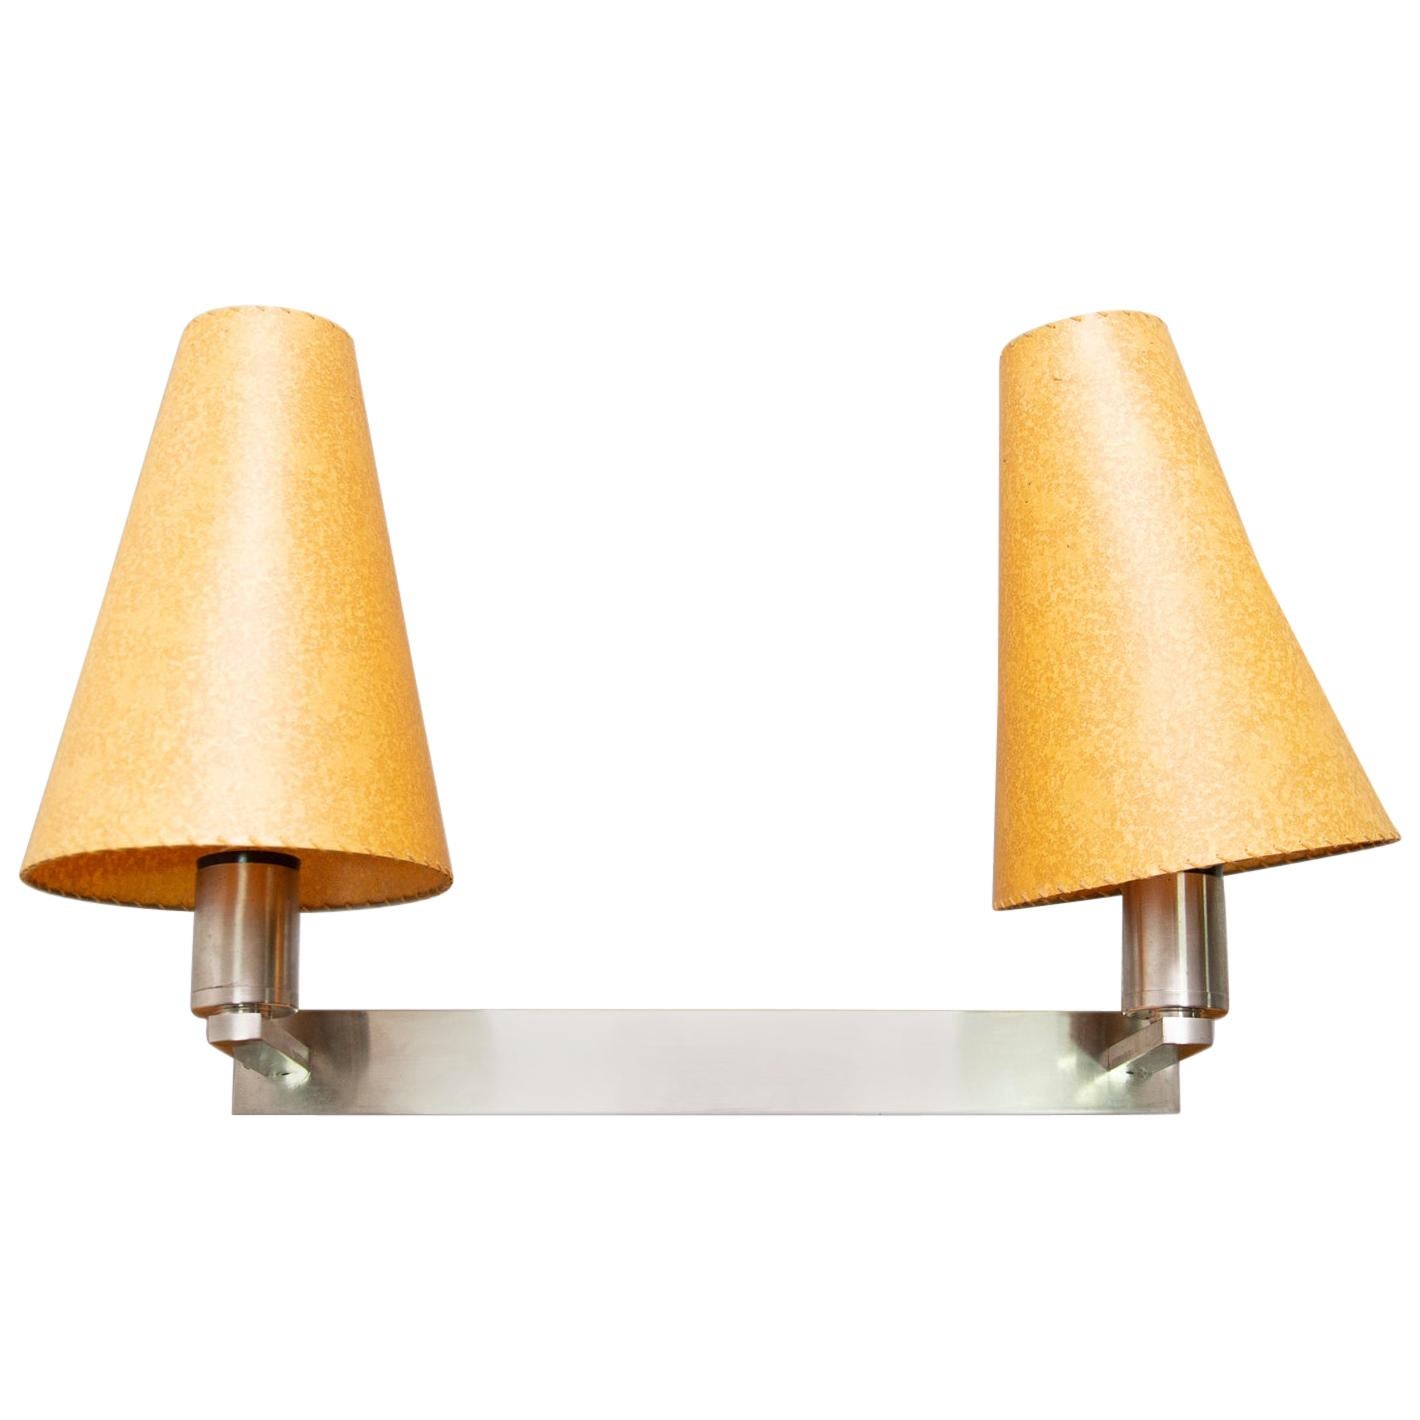 Bauhaus Chromed Wall Lamp with Two Lampshades by Vlastimil Brožek, Czechoslovaki For Sale